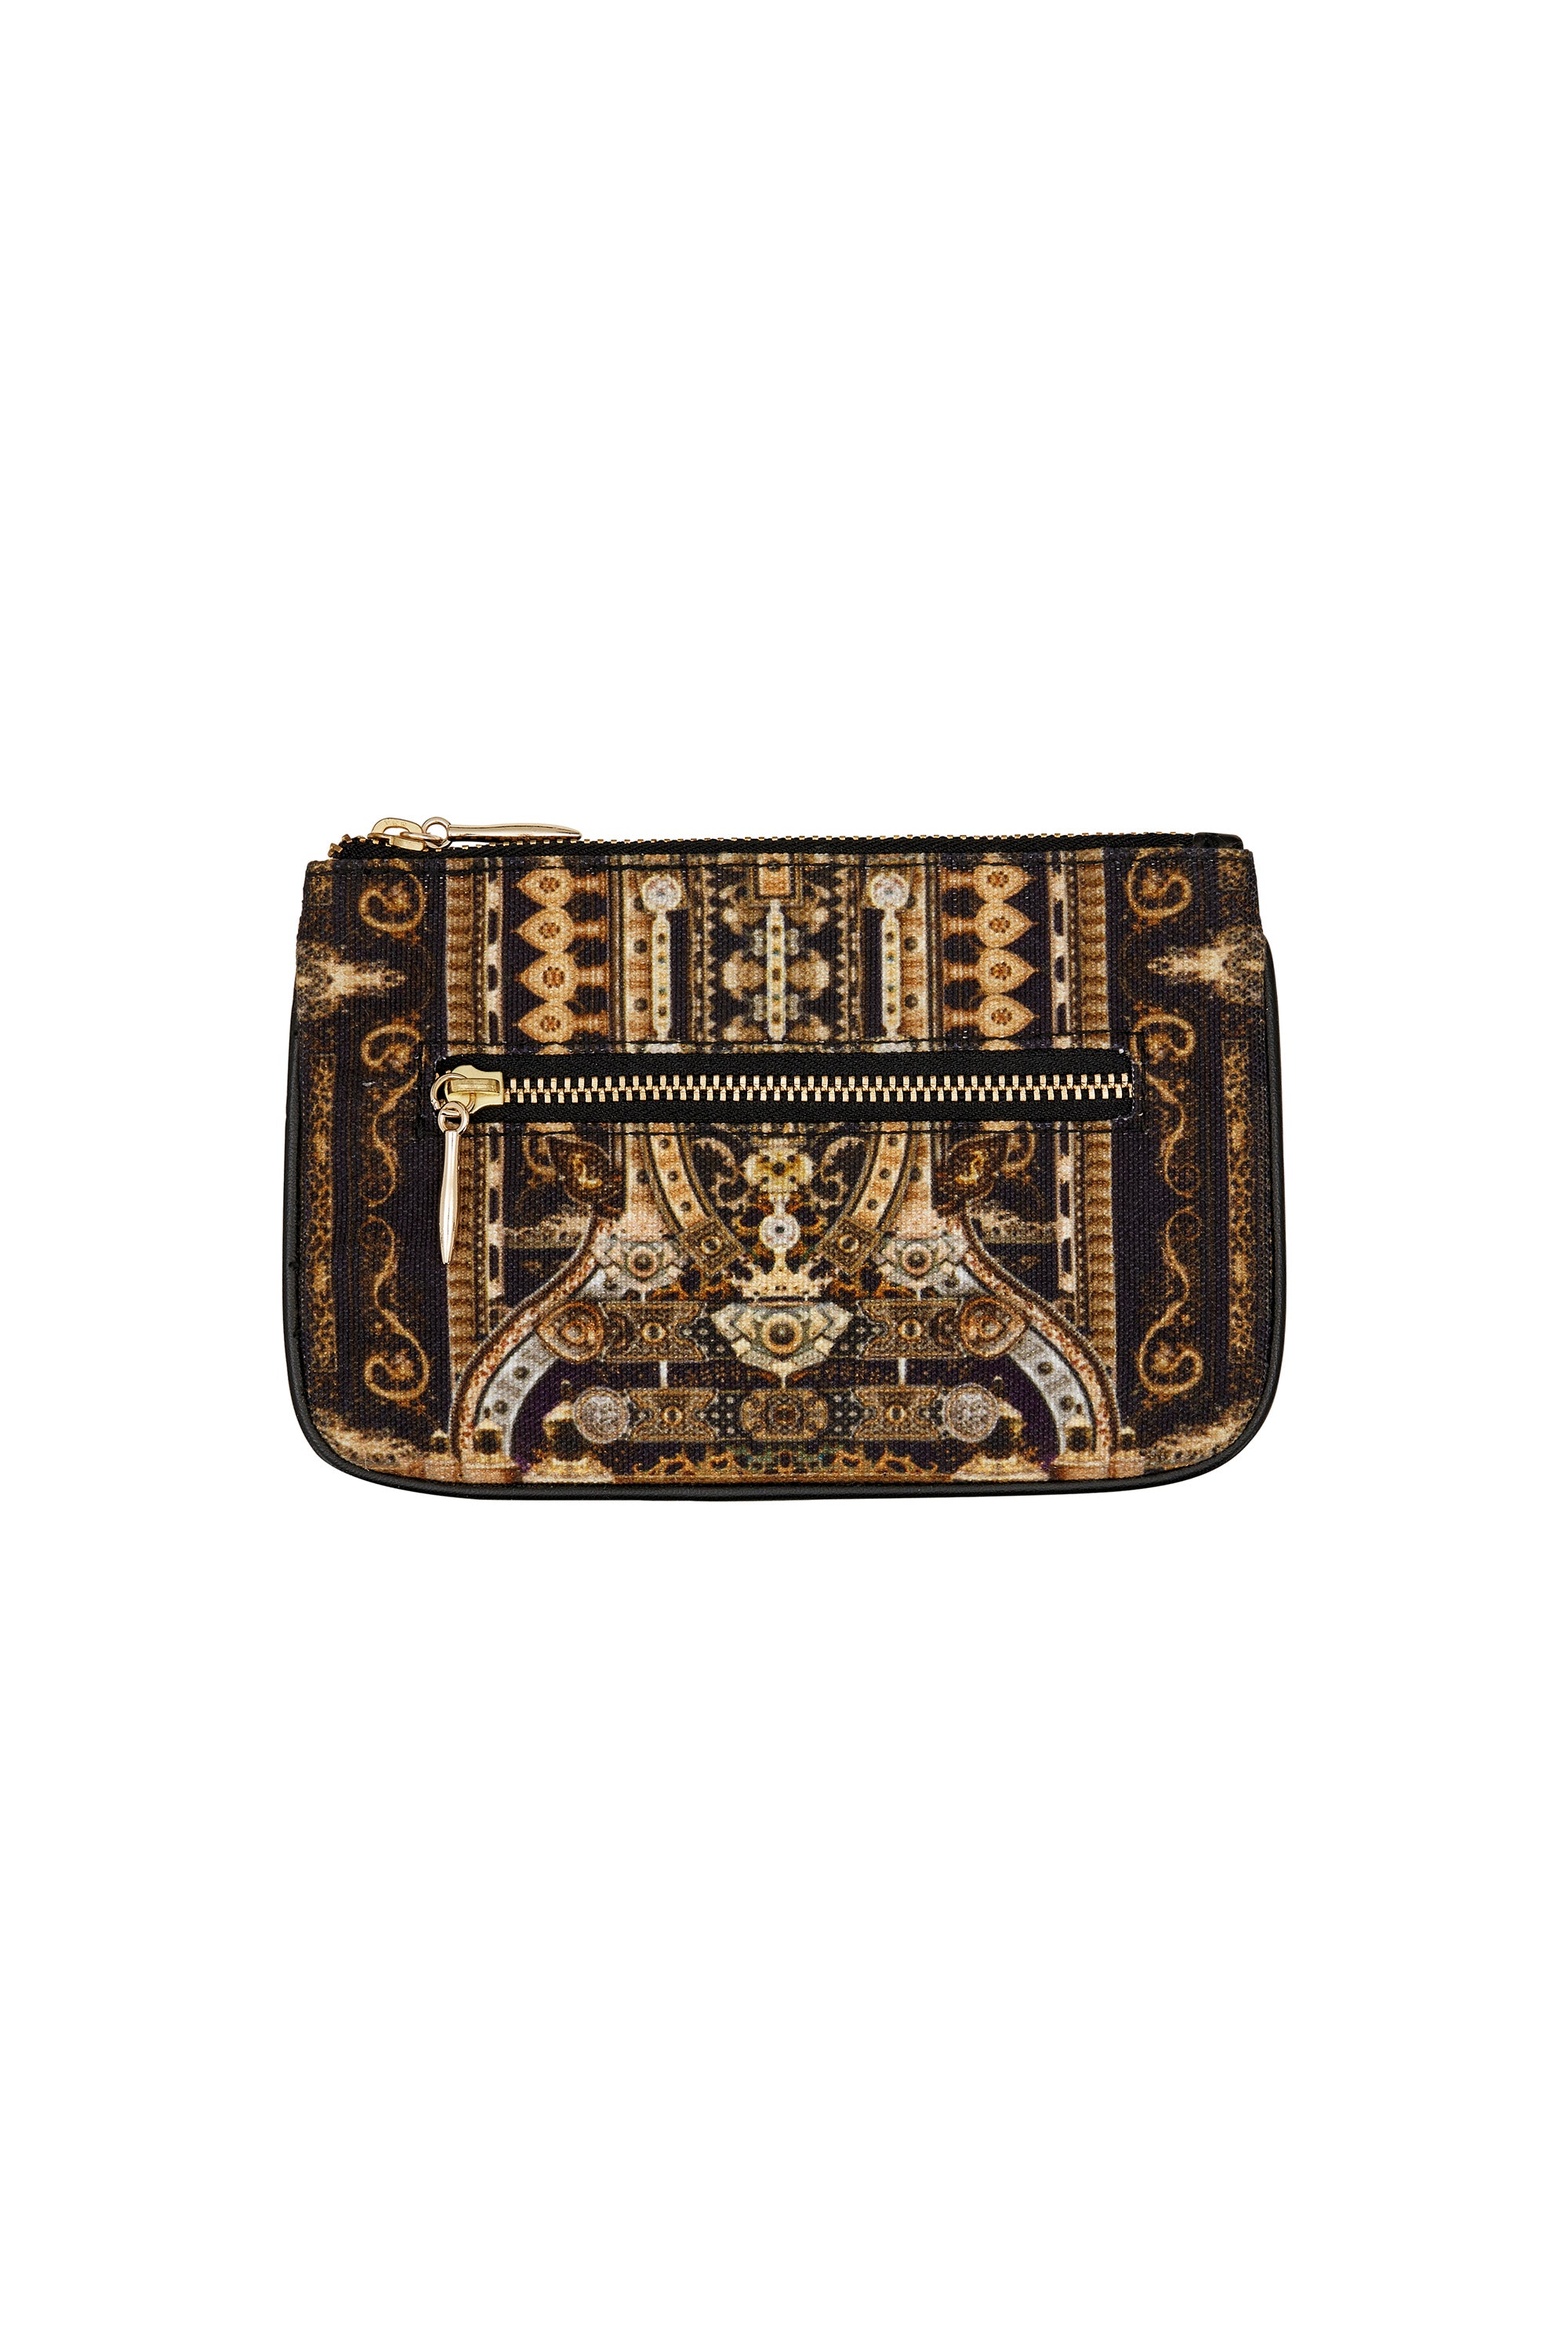 FOR THE LOVE OF LHASA PHONE & COIN PURSE